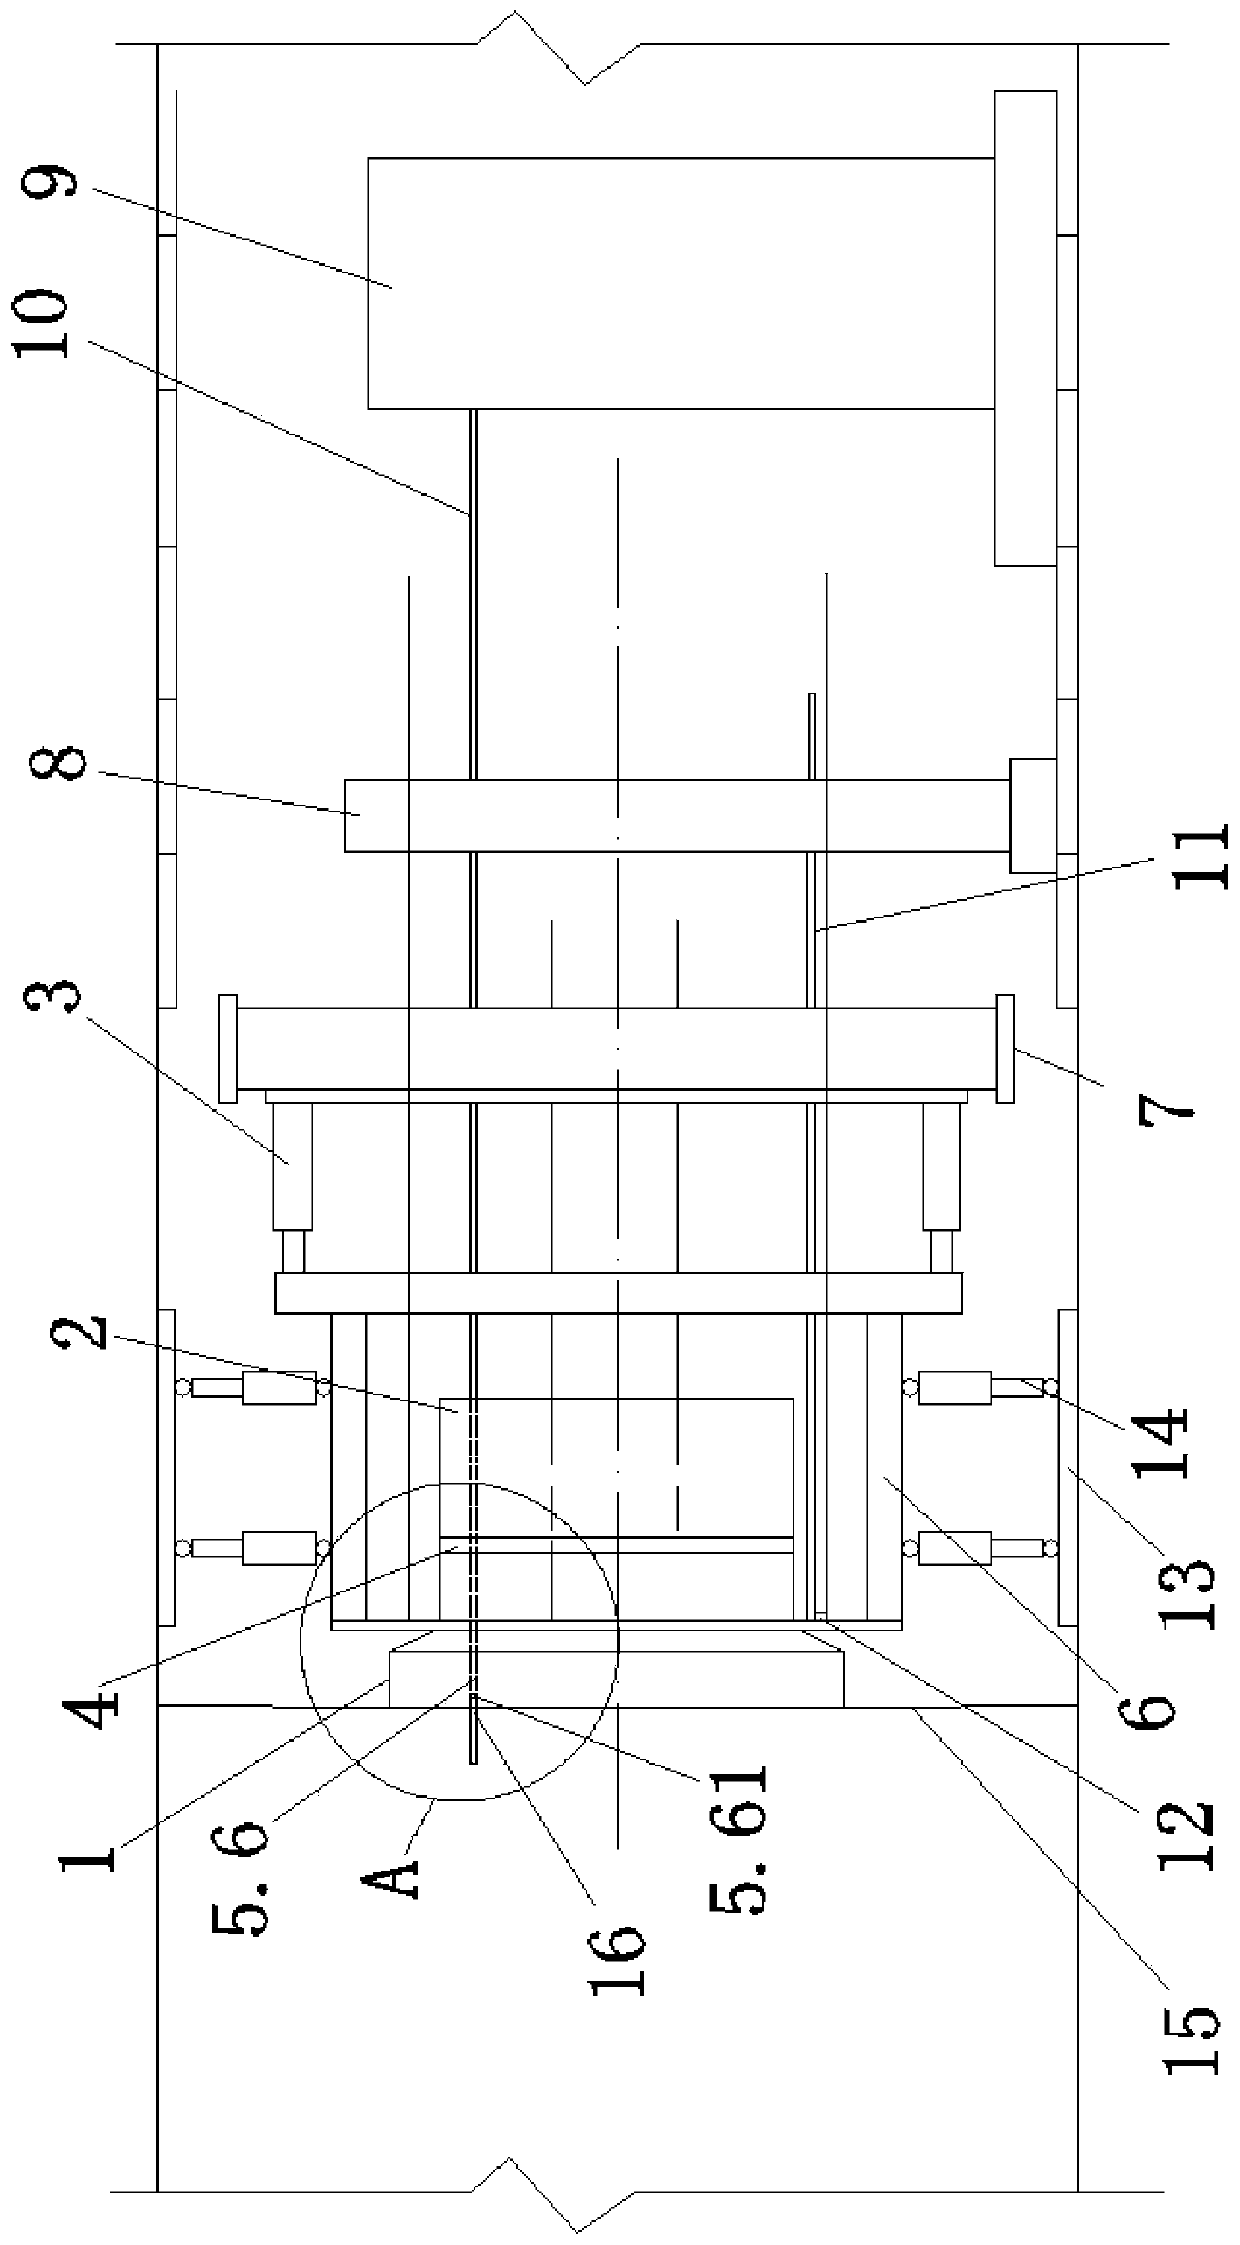 Mechanical-hydraulic combined rock breaking TBM tunneling equipment and tunneling method thereof